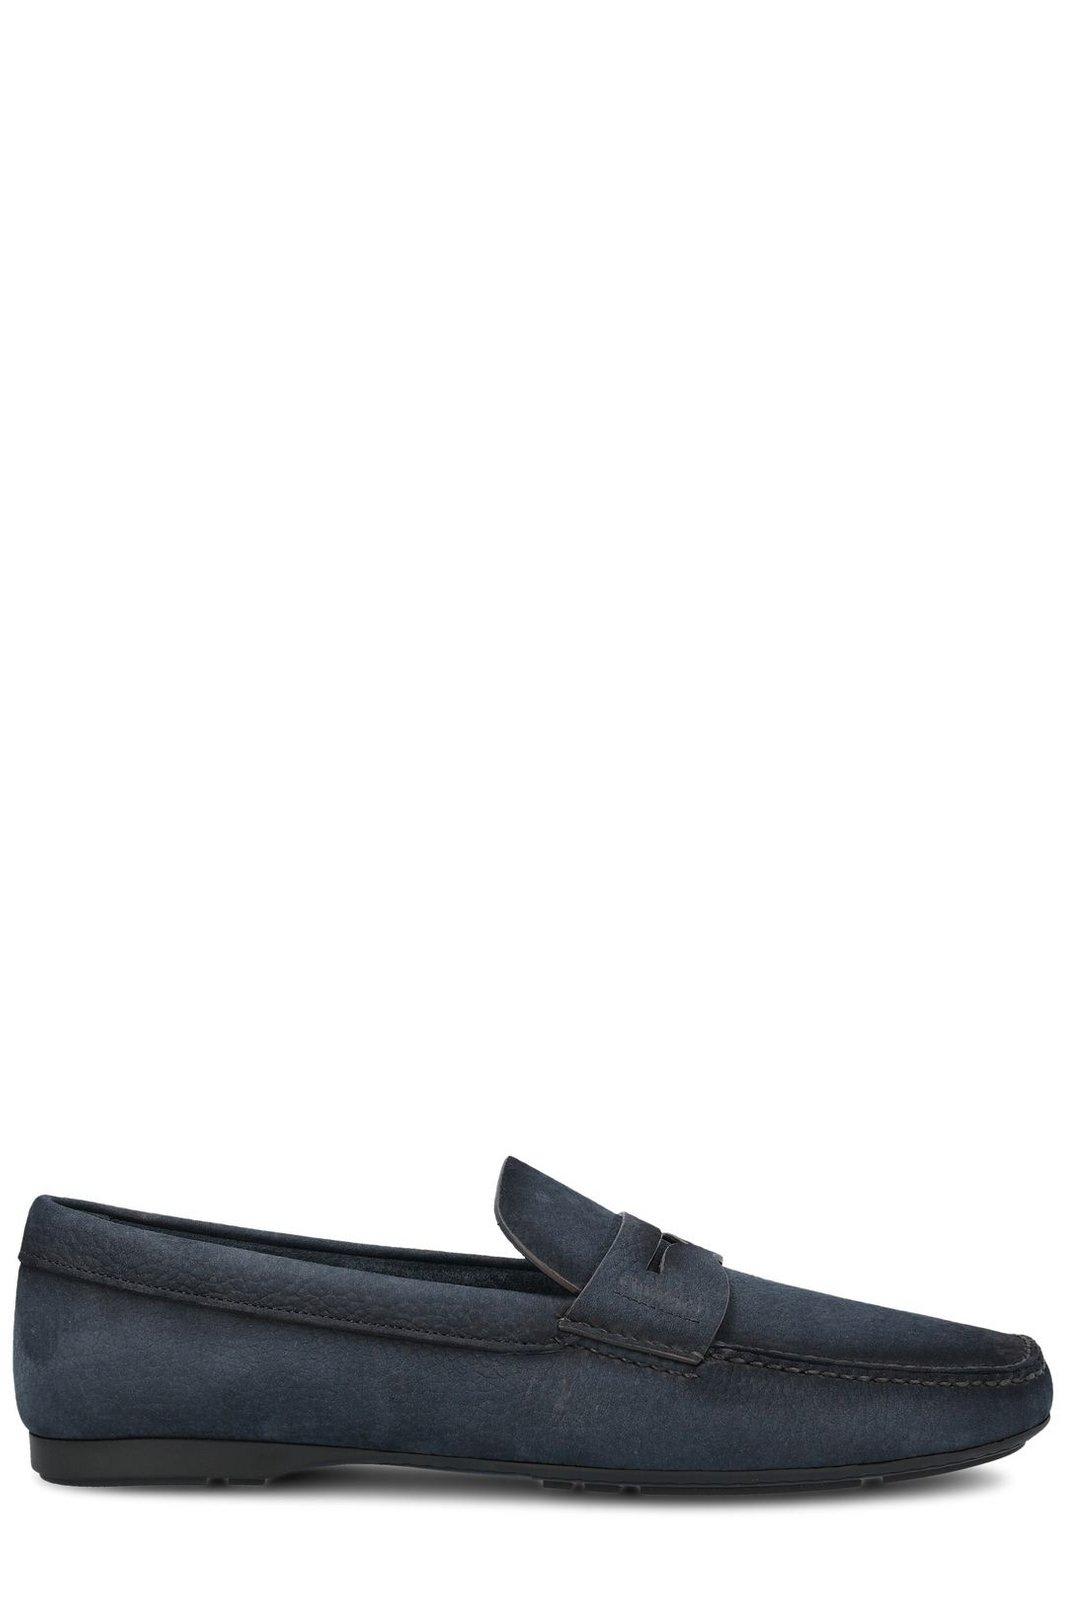 Church's Round-toe Slip-on Loafers In Abm Navy